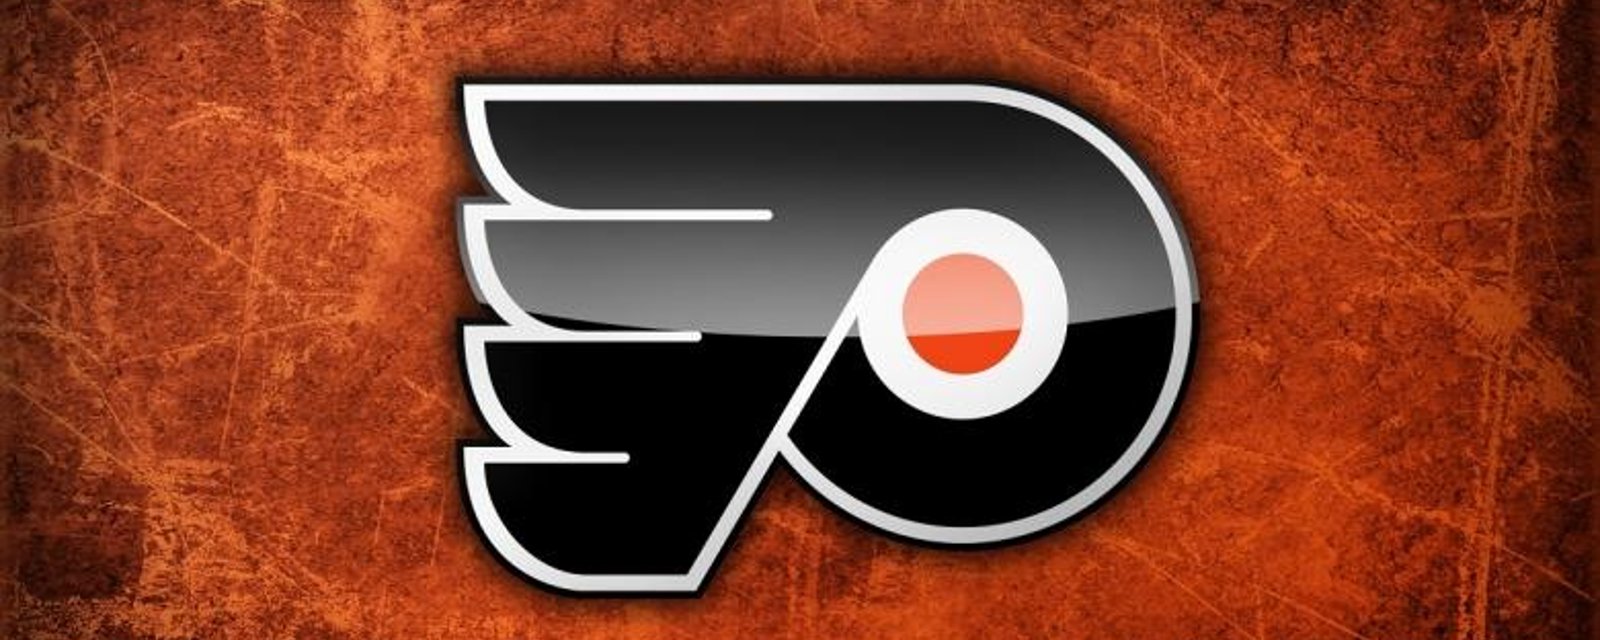 Breaking: The Flyers have traded their first round draft pick!